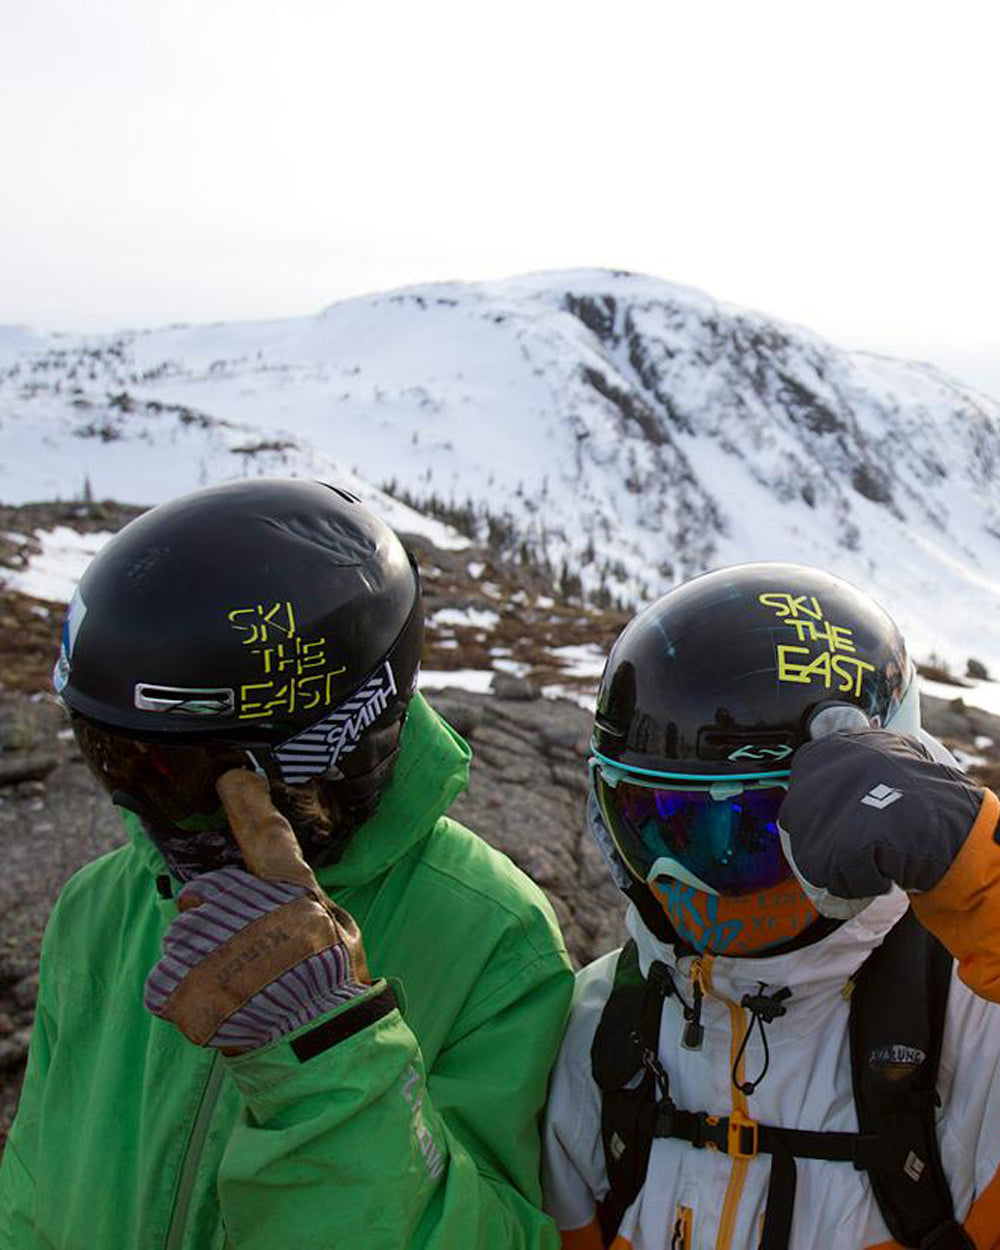 Stickers for Skiers and Snowboarders or those who love mountains